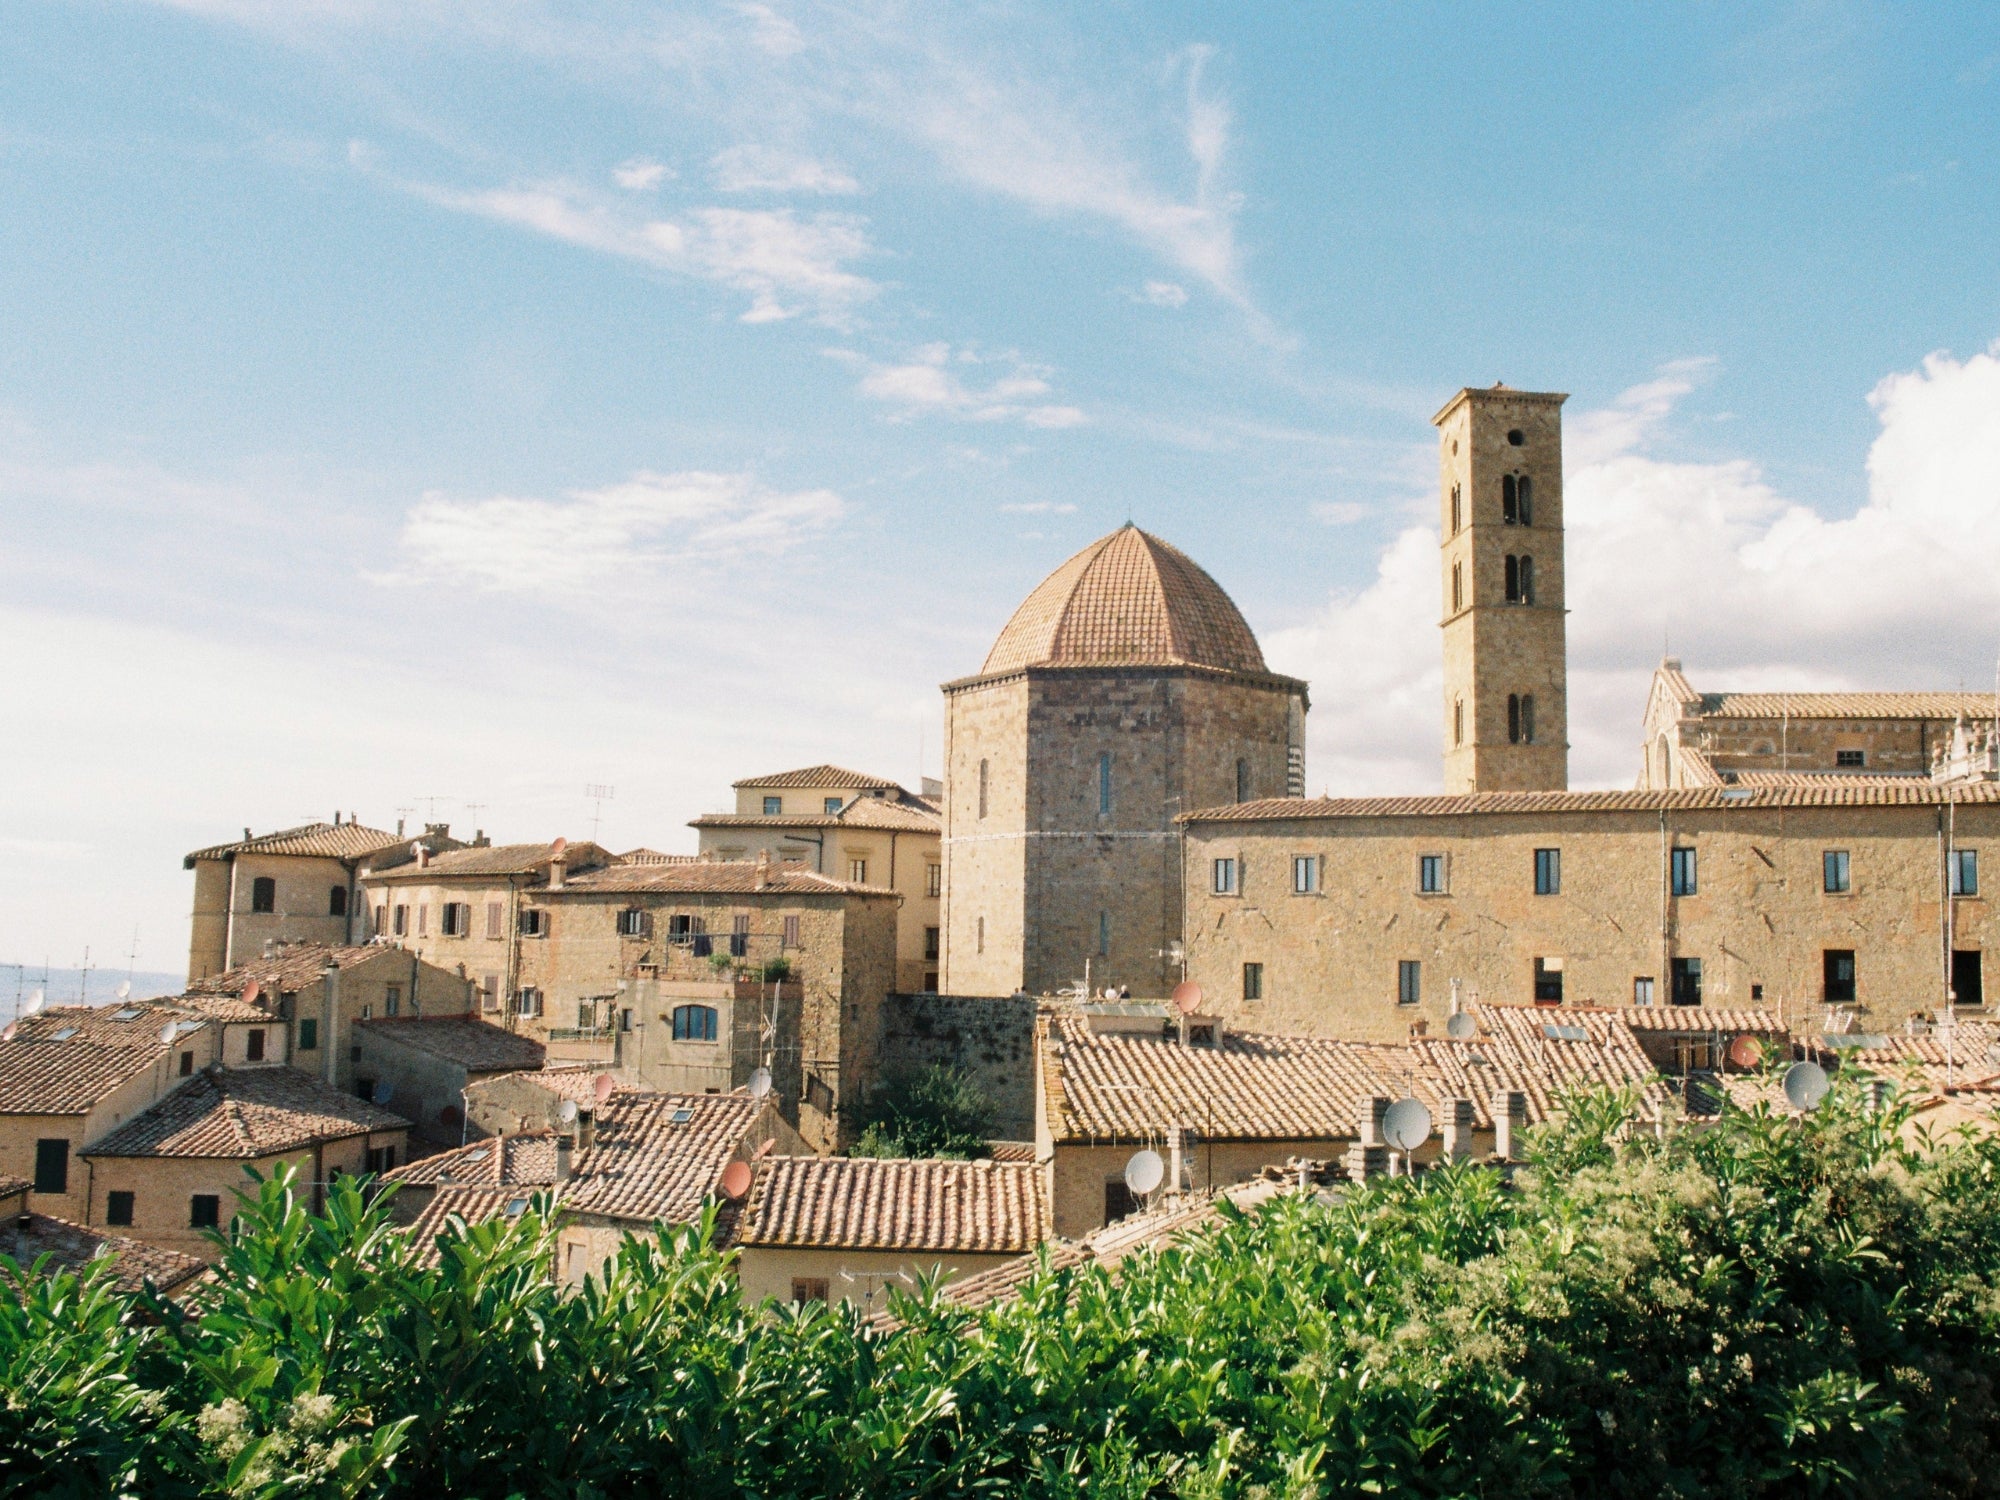 Views of the Dome of and Tower of the Church of the hilltop town of Volterra, in Tuscany